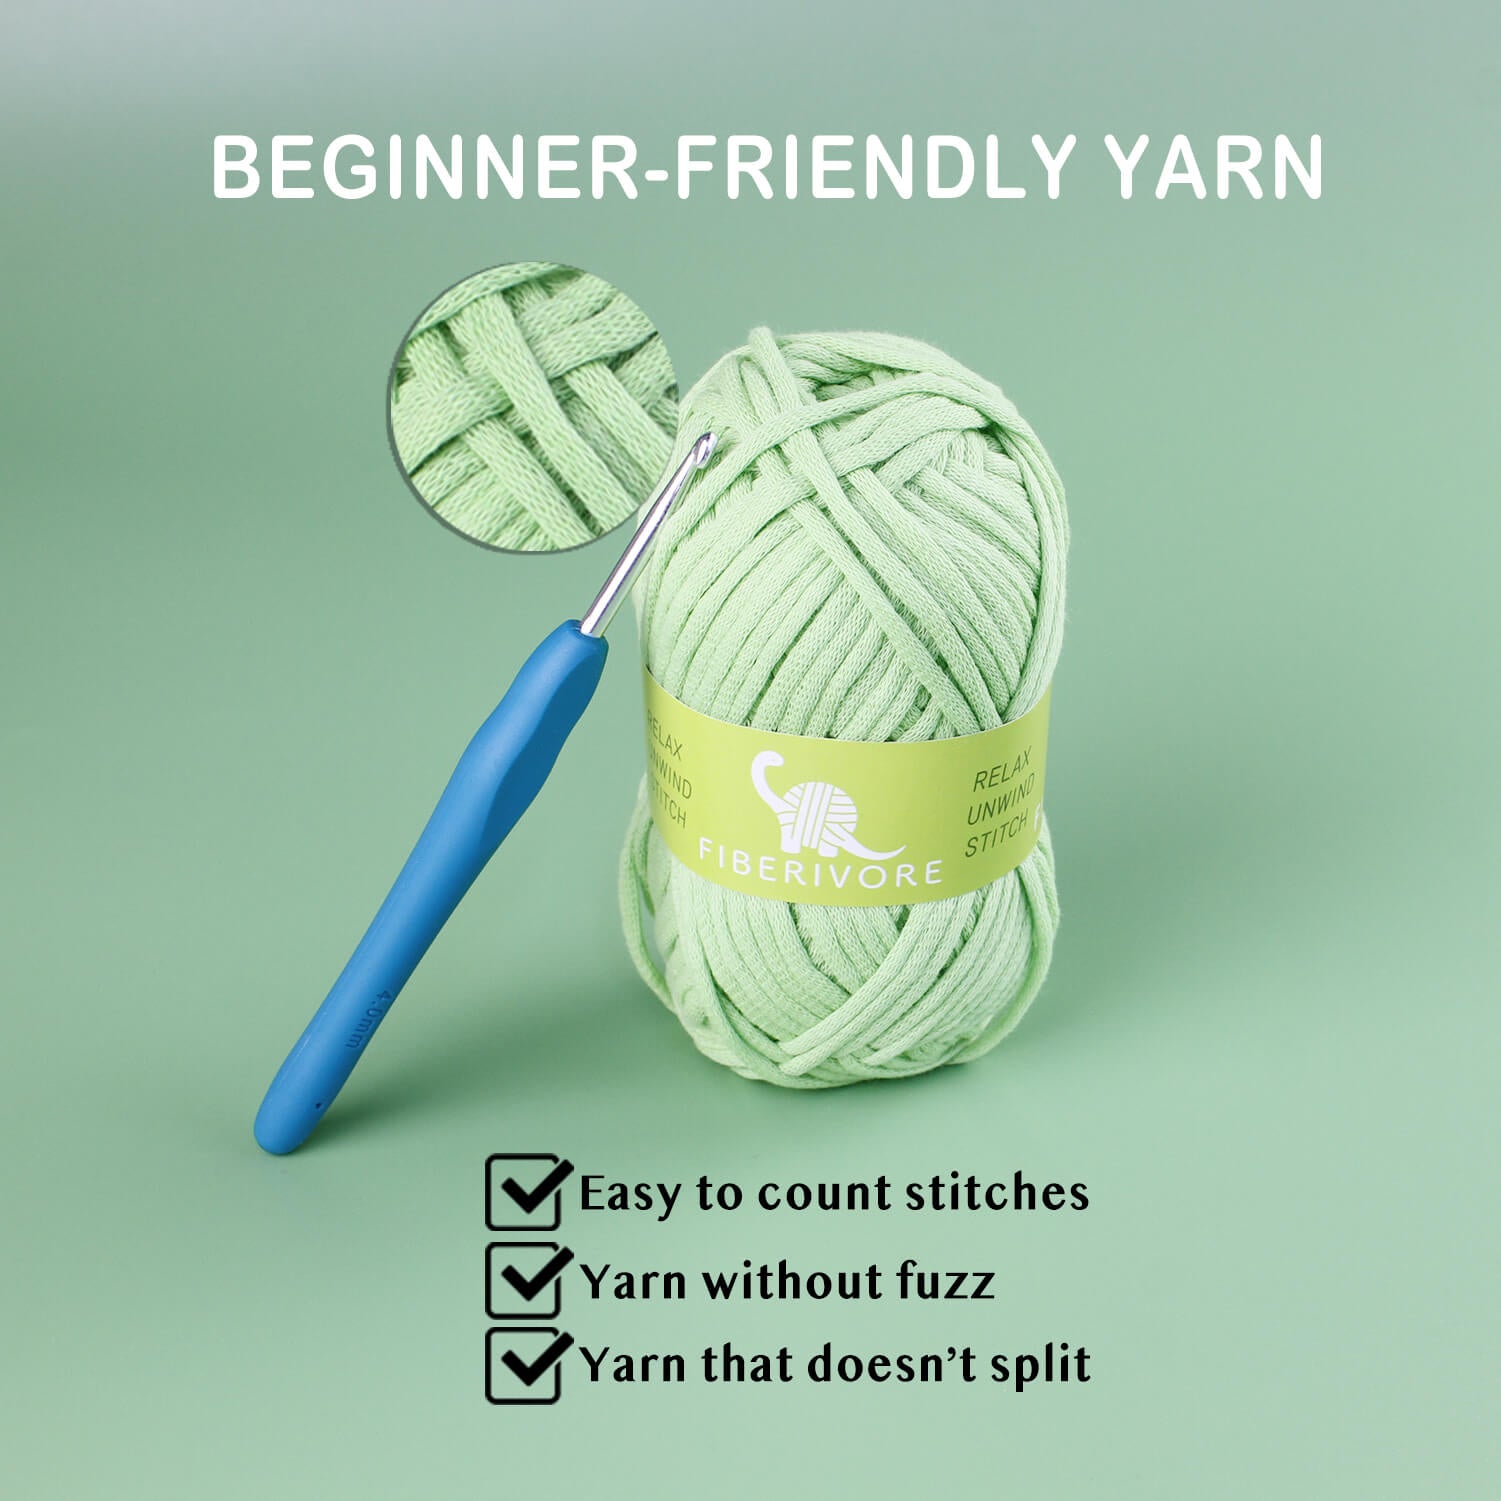 Crochet Kit for Beginners Adults Children with Crochet Yarn with